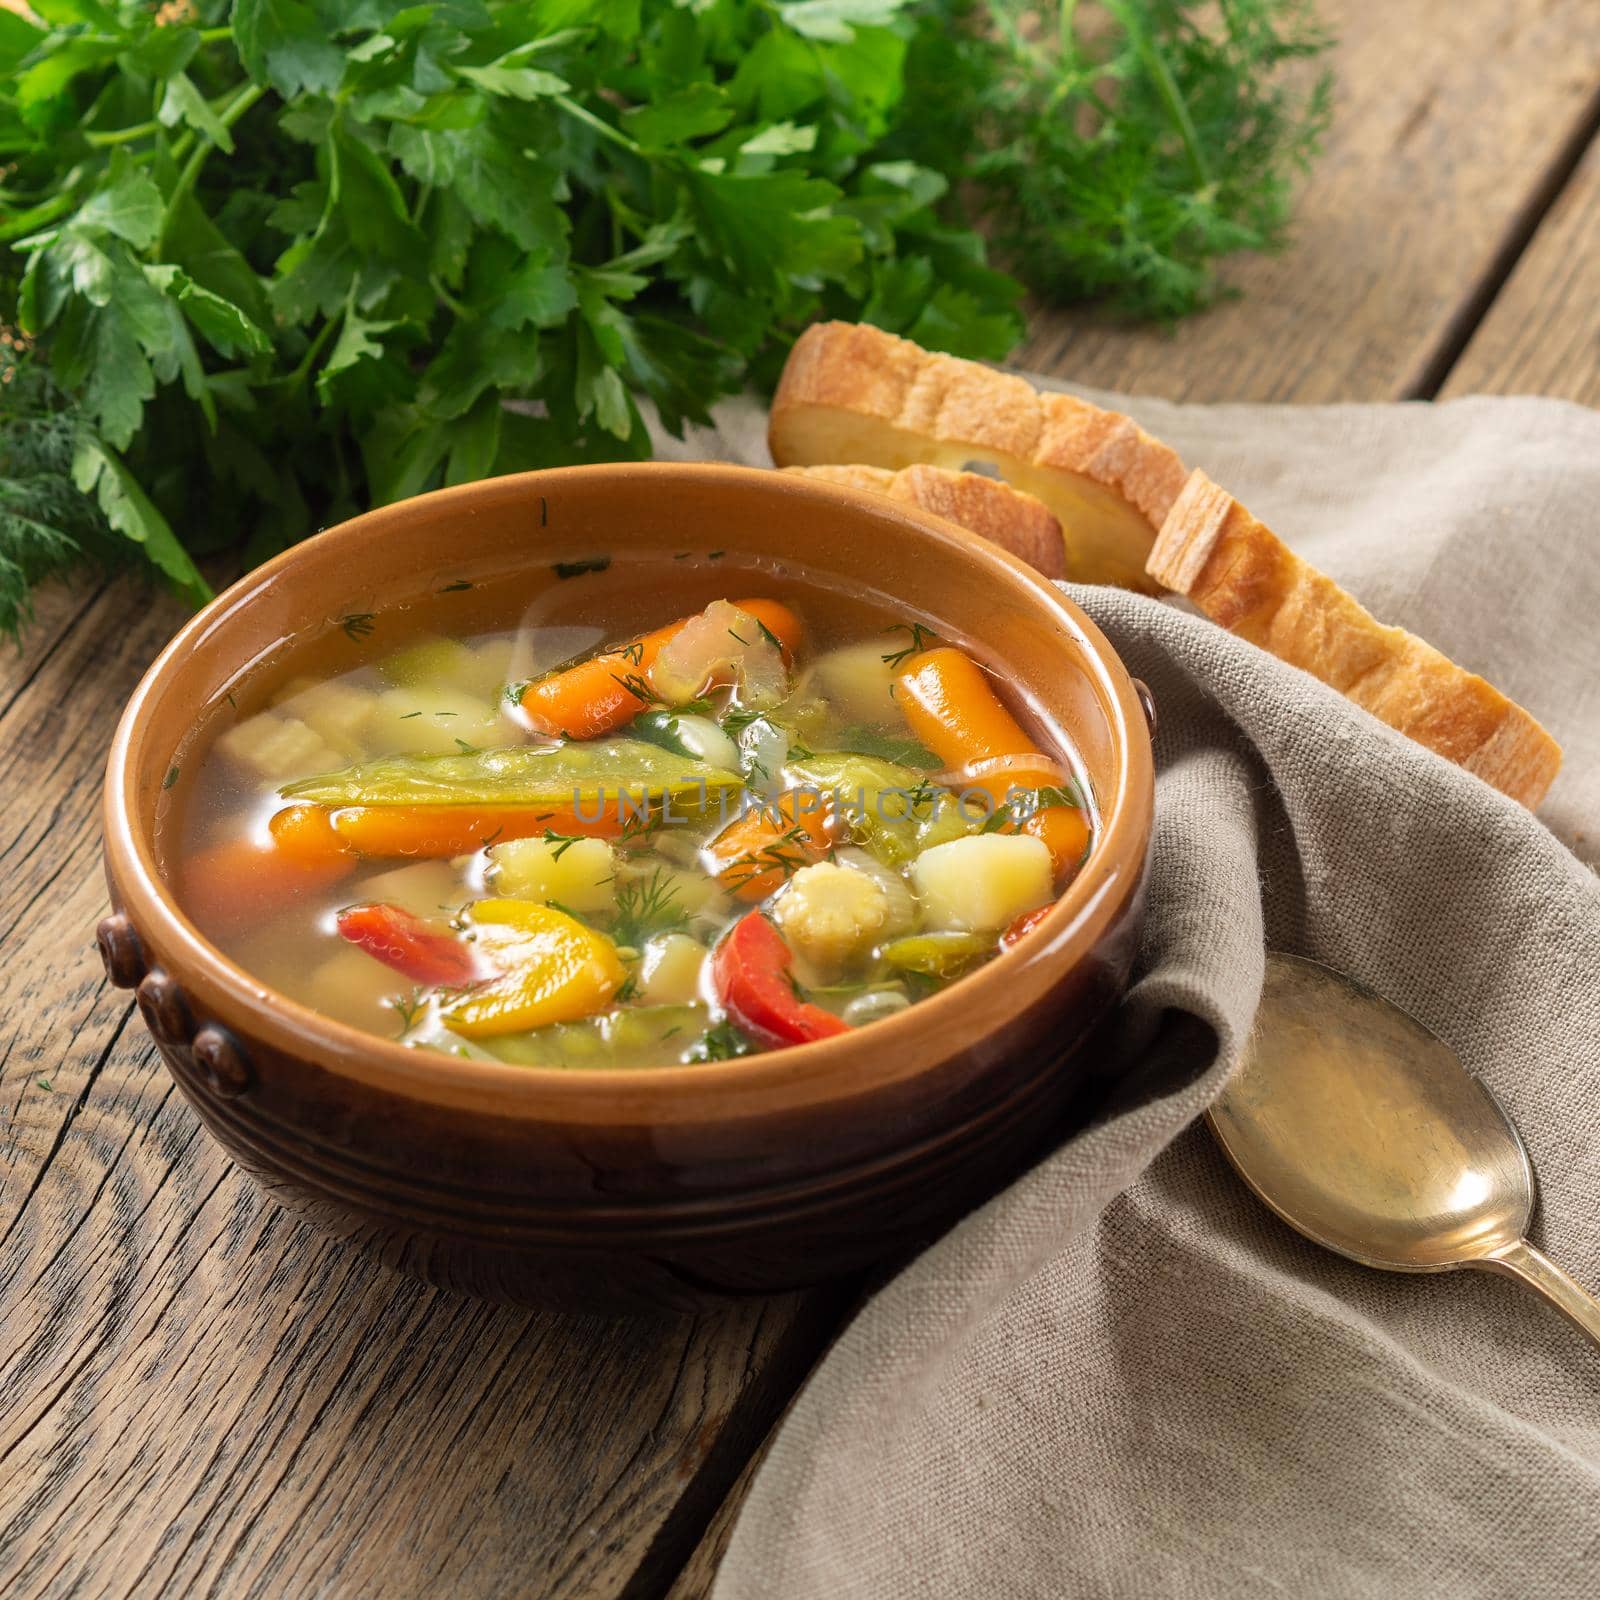 Bright spring vegetable dietary vegetarian soup with potatoes, pepper, carrot, green peas, parsley. Side view, brown rustic wood background, linen napkin.